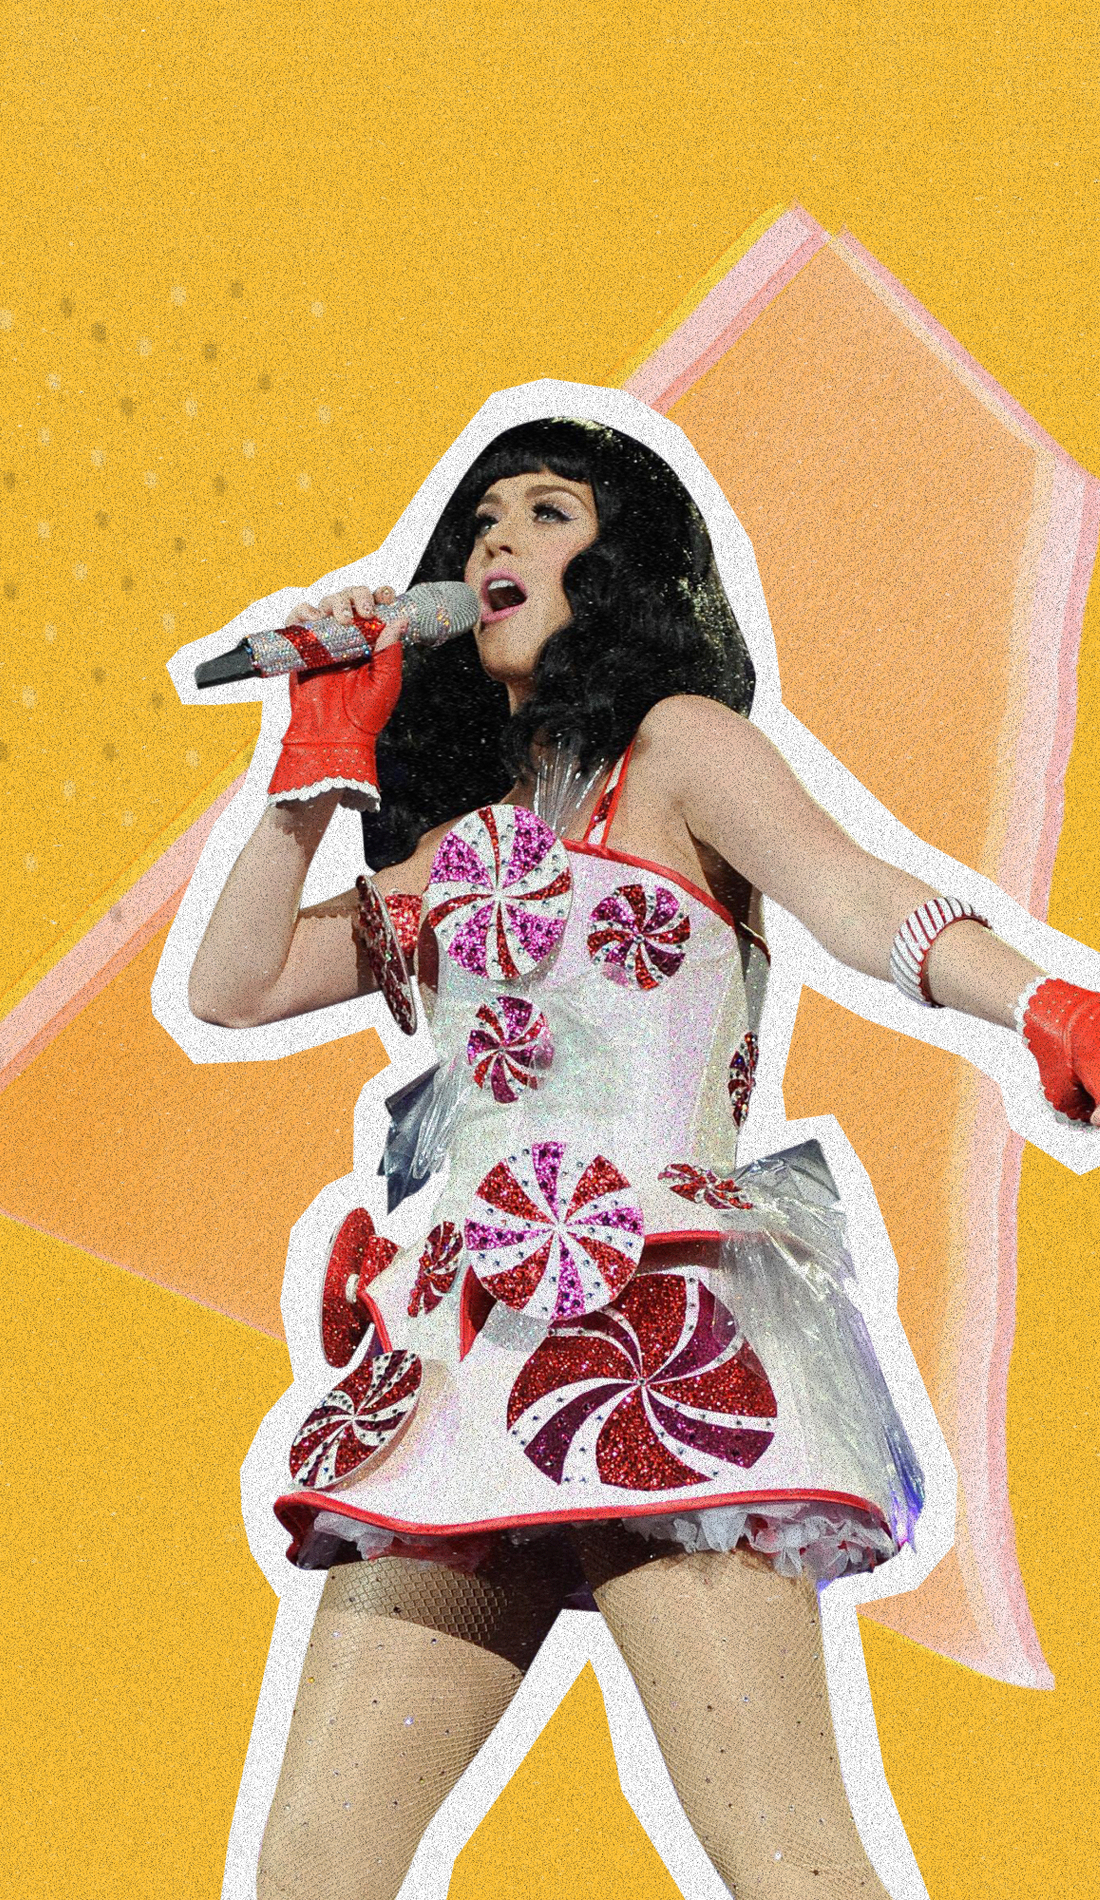 A Katy Perry live event